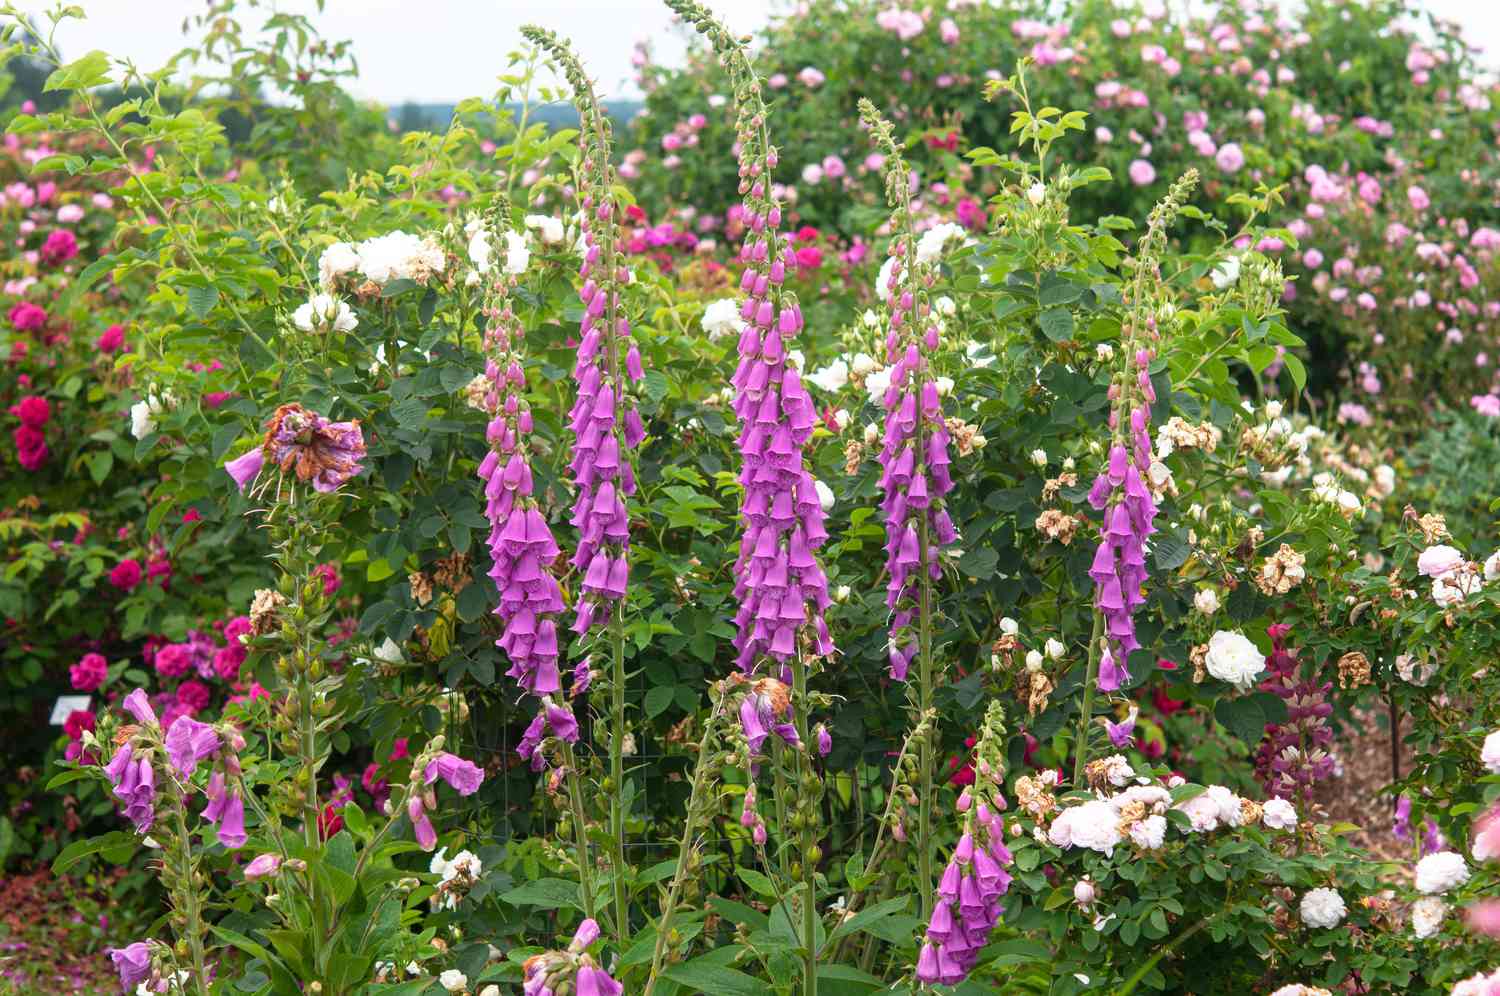 Foxglove plant with pink bell-shaped flowers on tall stems